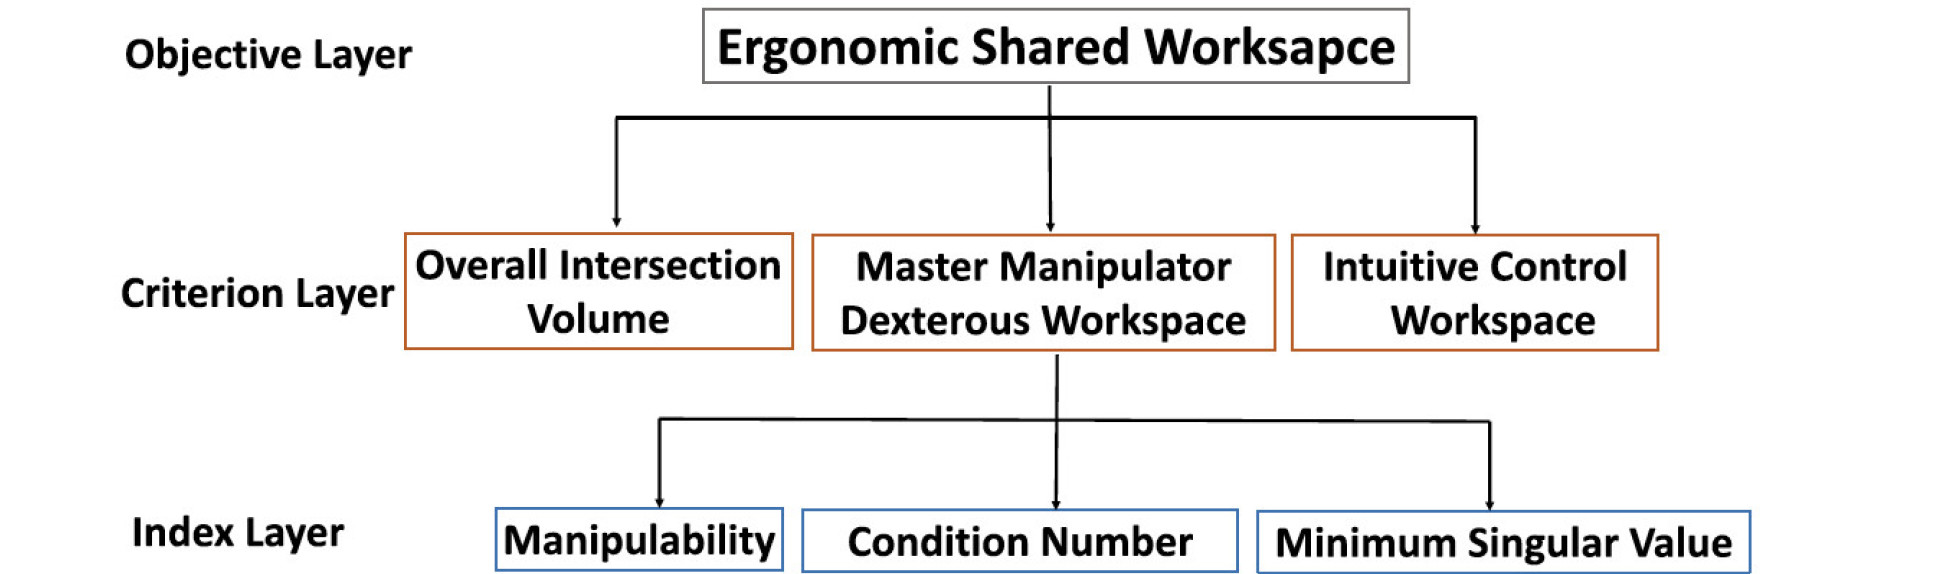 Schematic diagram of the construction of the AHP based ergonomics hared workspace analysis framework.